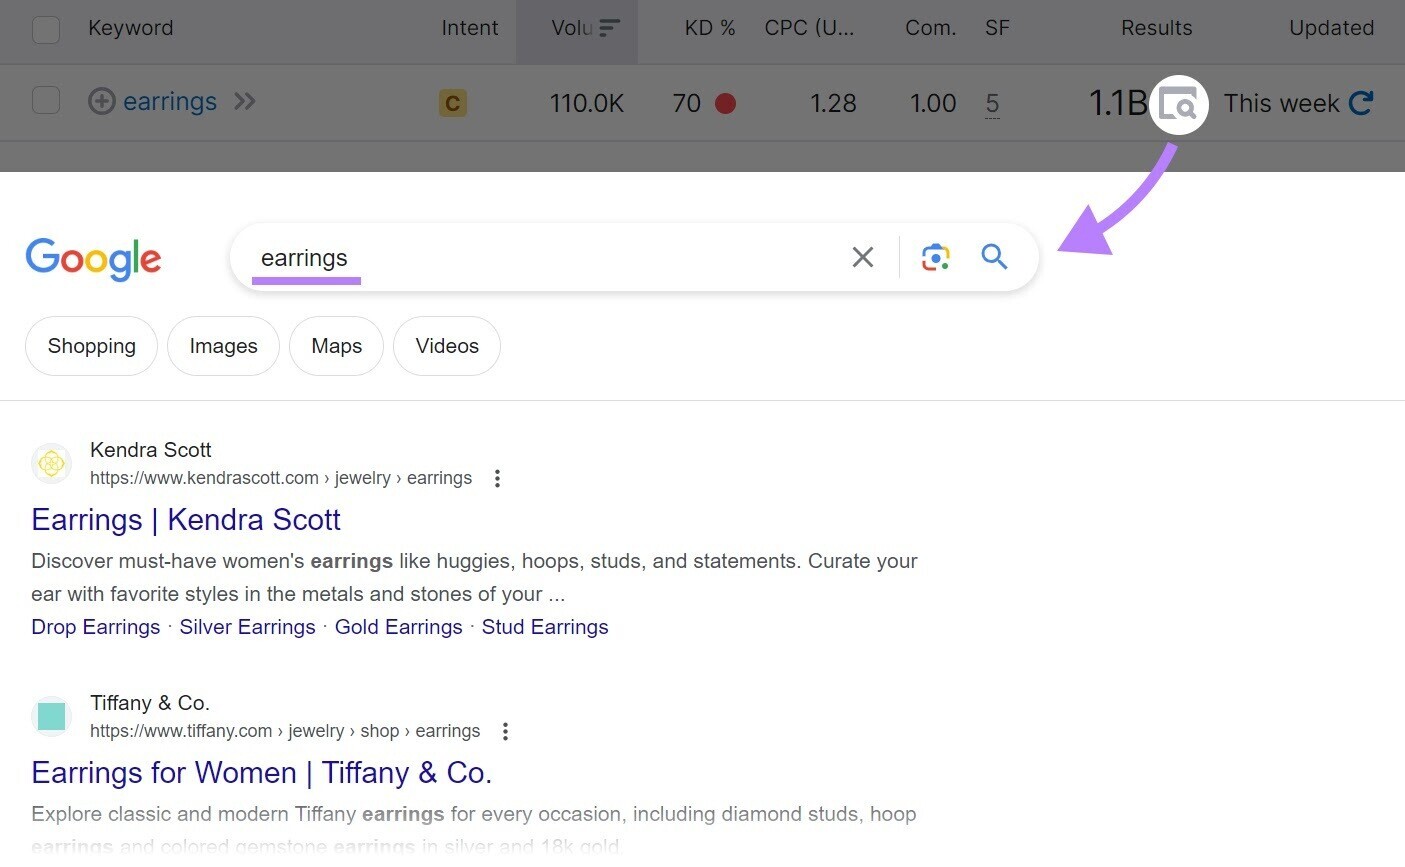 clicking on “Results” icon next to "earrings" shows SERP for a given keyword